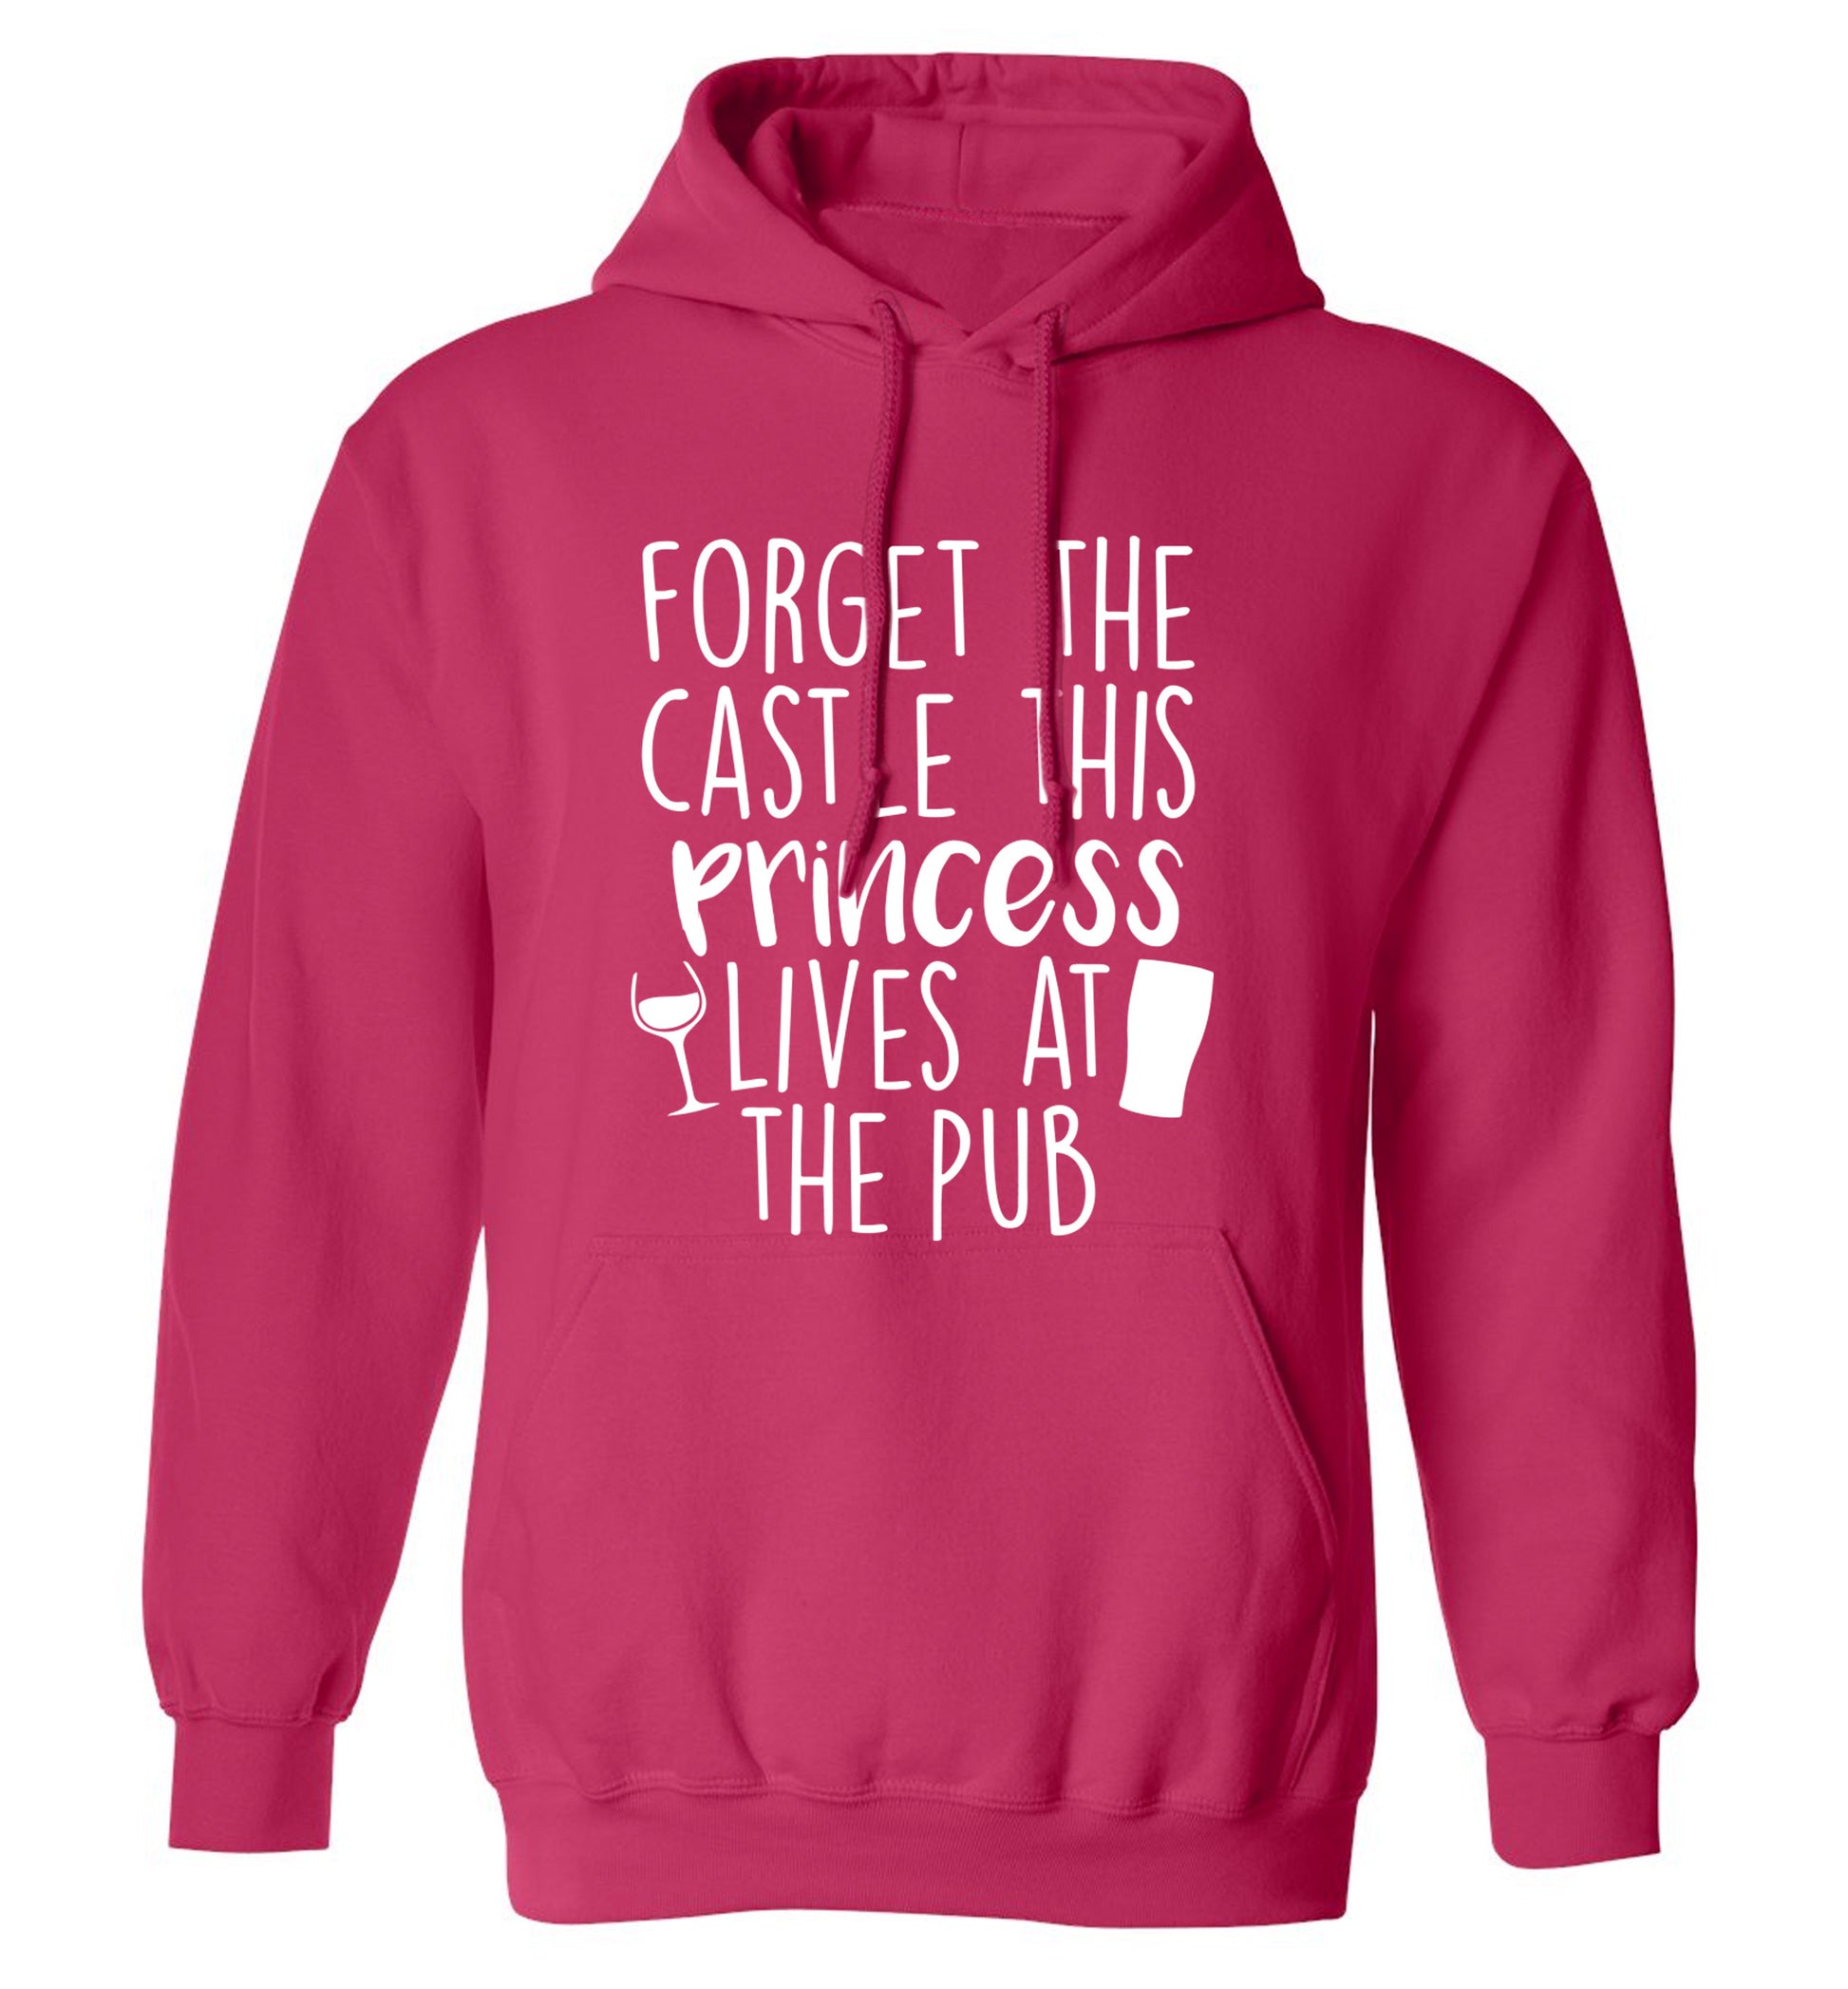 Forget the castle this princess lives at the pub adults unisex pink hoodie 2XL